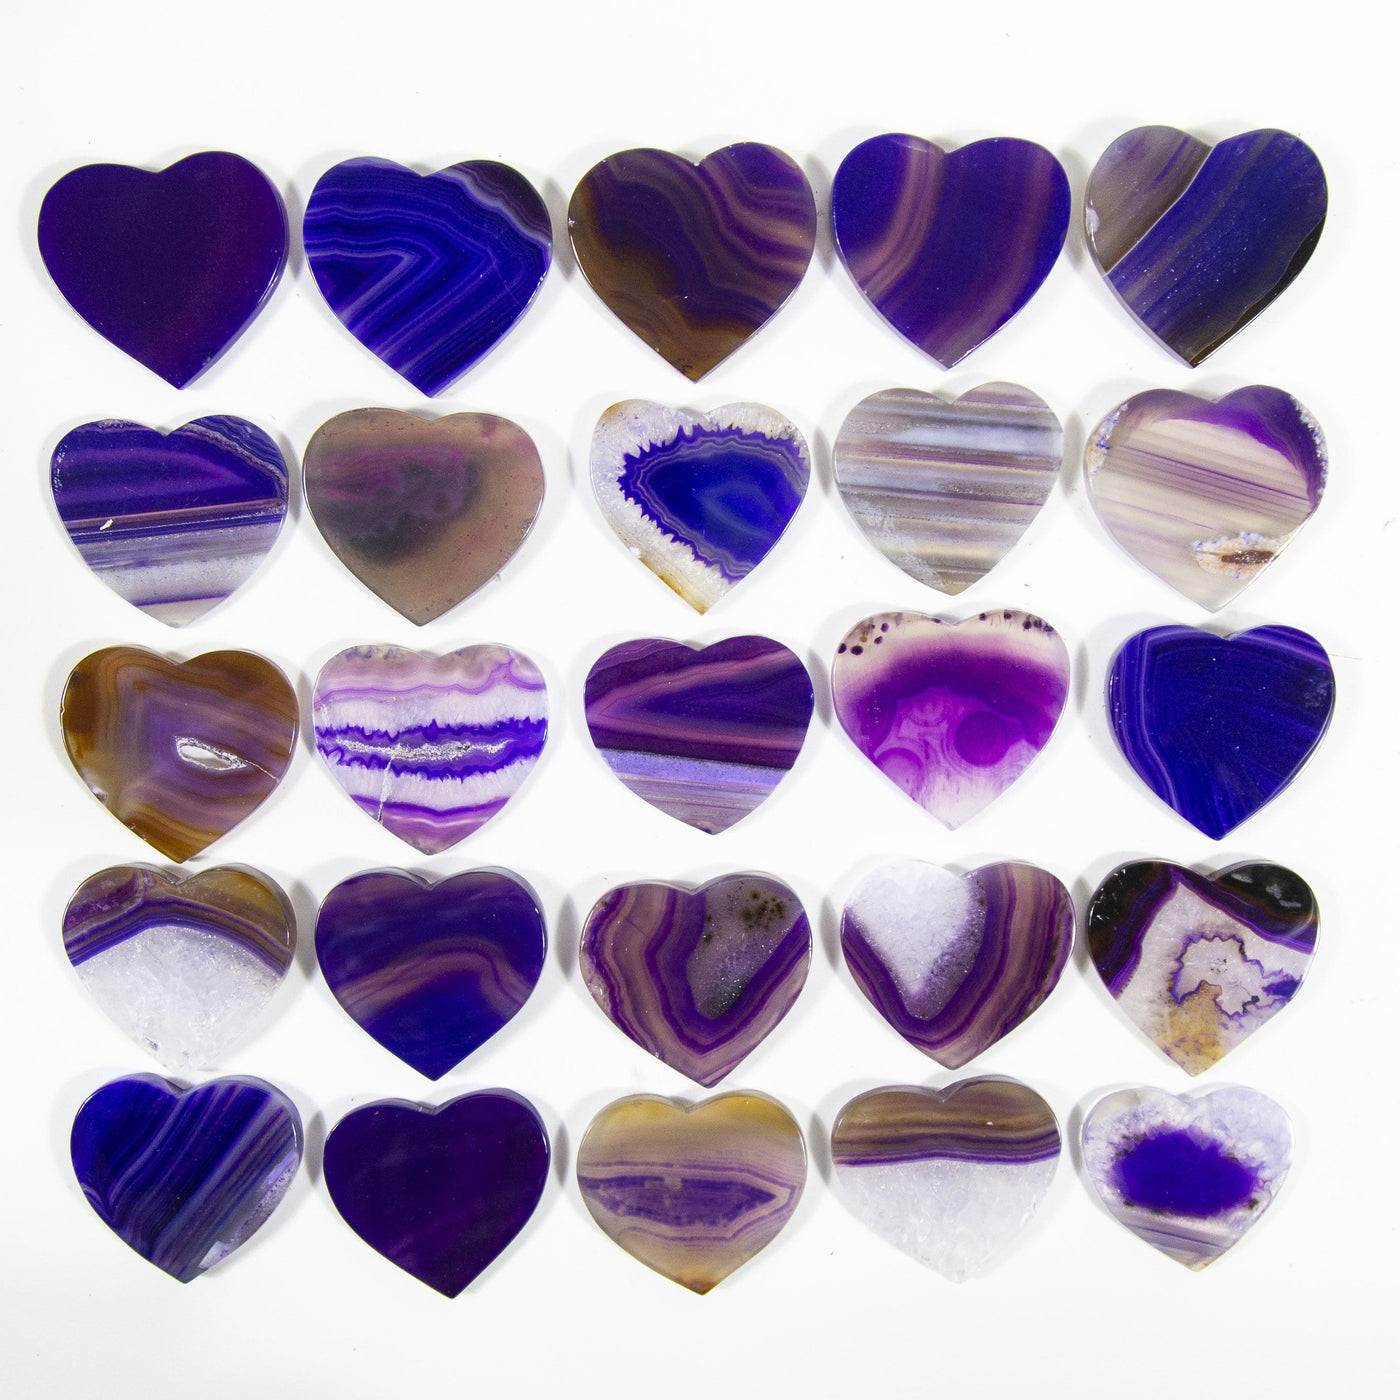 Multiple purple agate heart Shaped Cabochons displayed on a white background to display color and pattern variation.